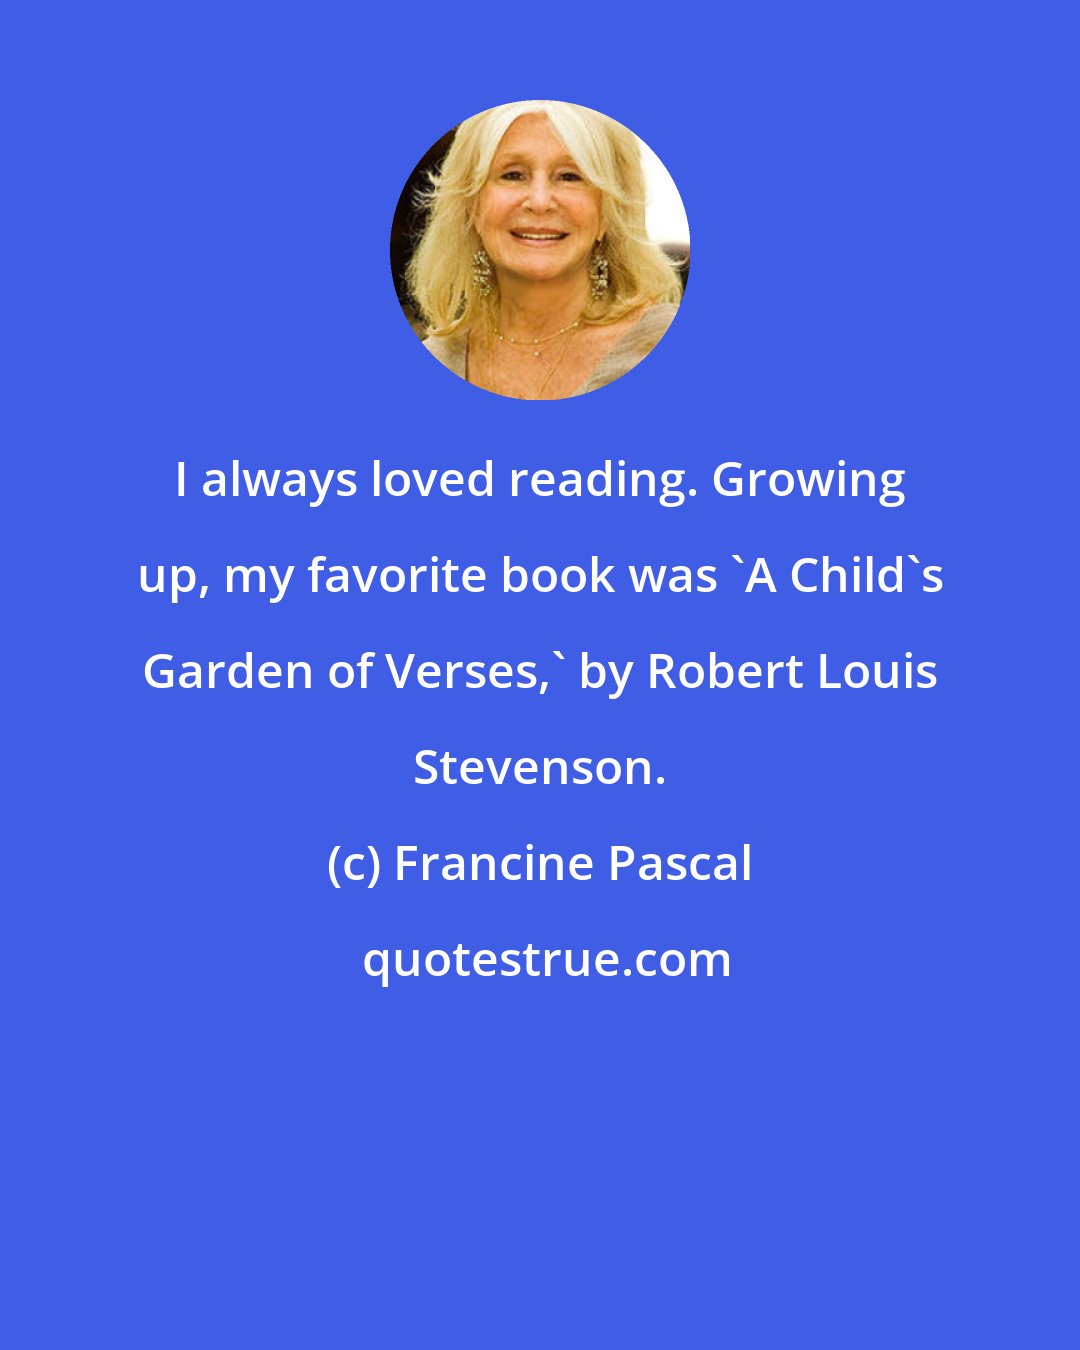 Francine Pascal: I always loved reading. Growing up, my favorite book was 'A Child's Garden of Verses,' by Robert Louis Stevenson.